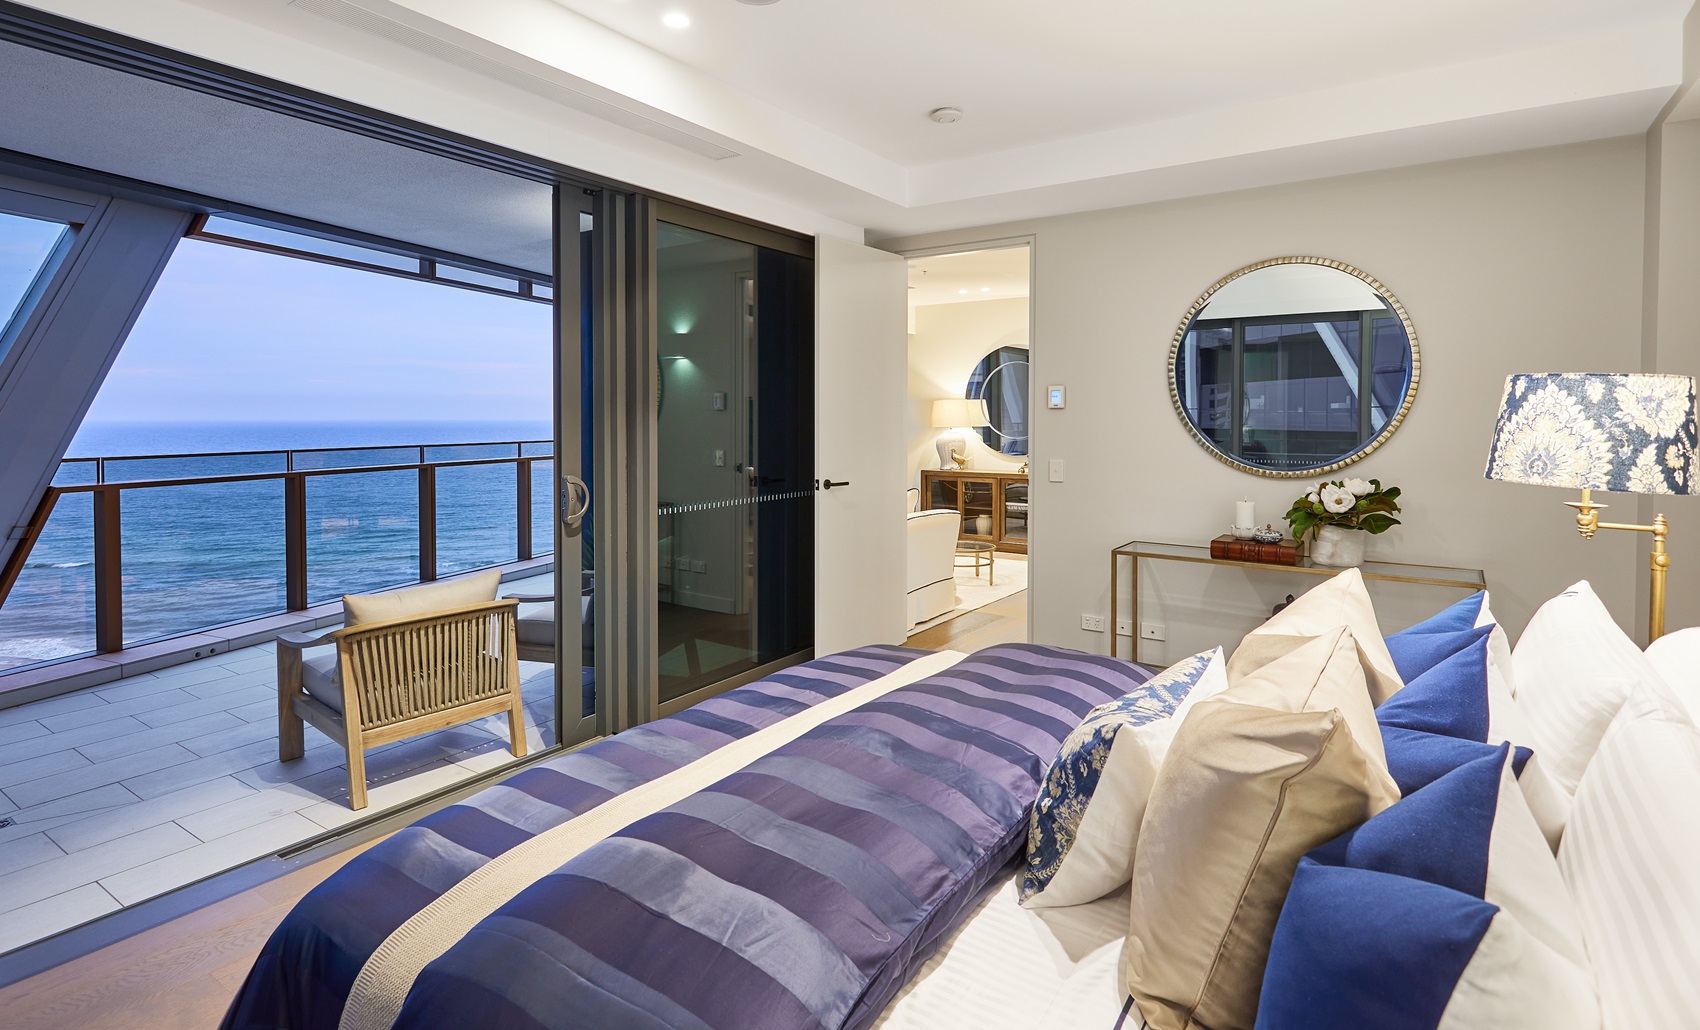 Wake up to the sun rising over the Pacific Ocean in your brand new apartment at Jewel